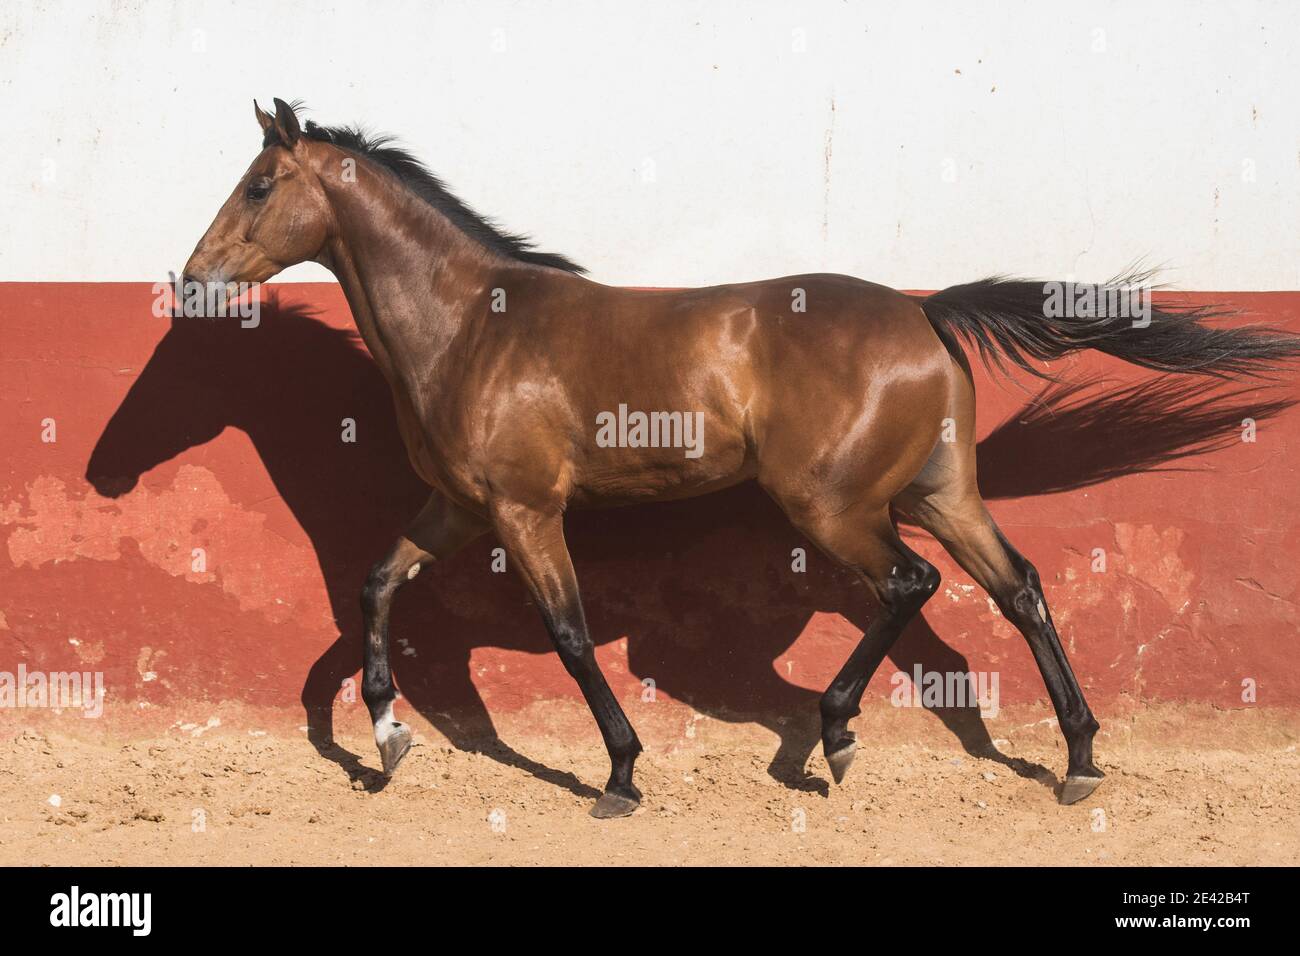 Beautiful brown gelding thoroughbred horse trotting in freedom Stock Photo